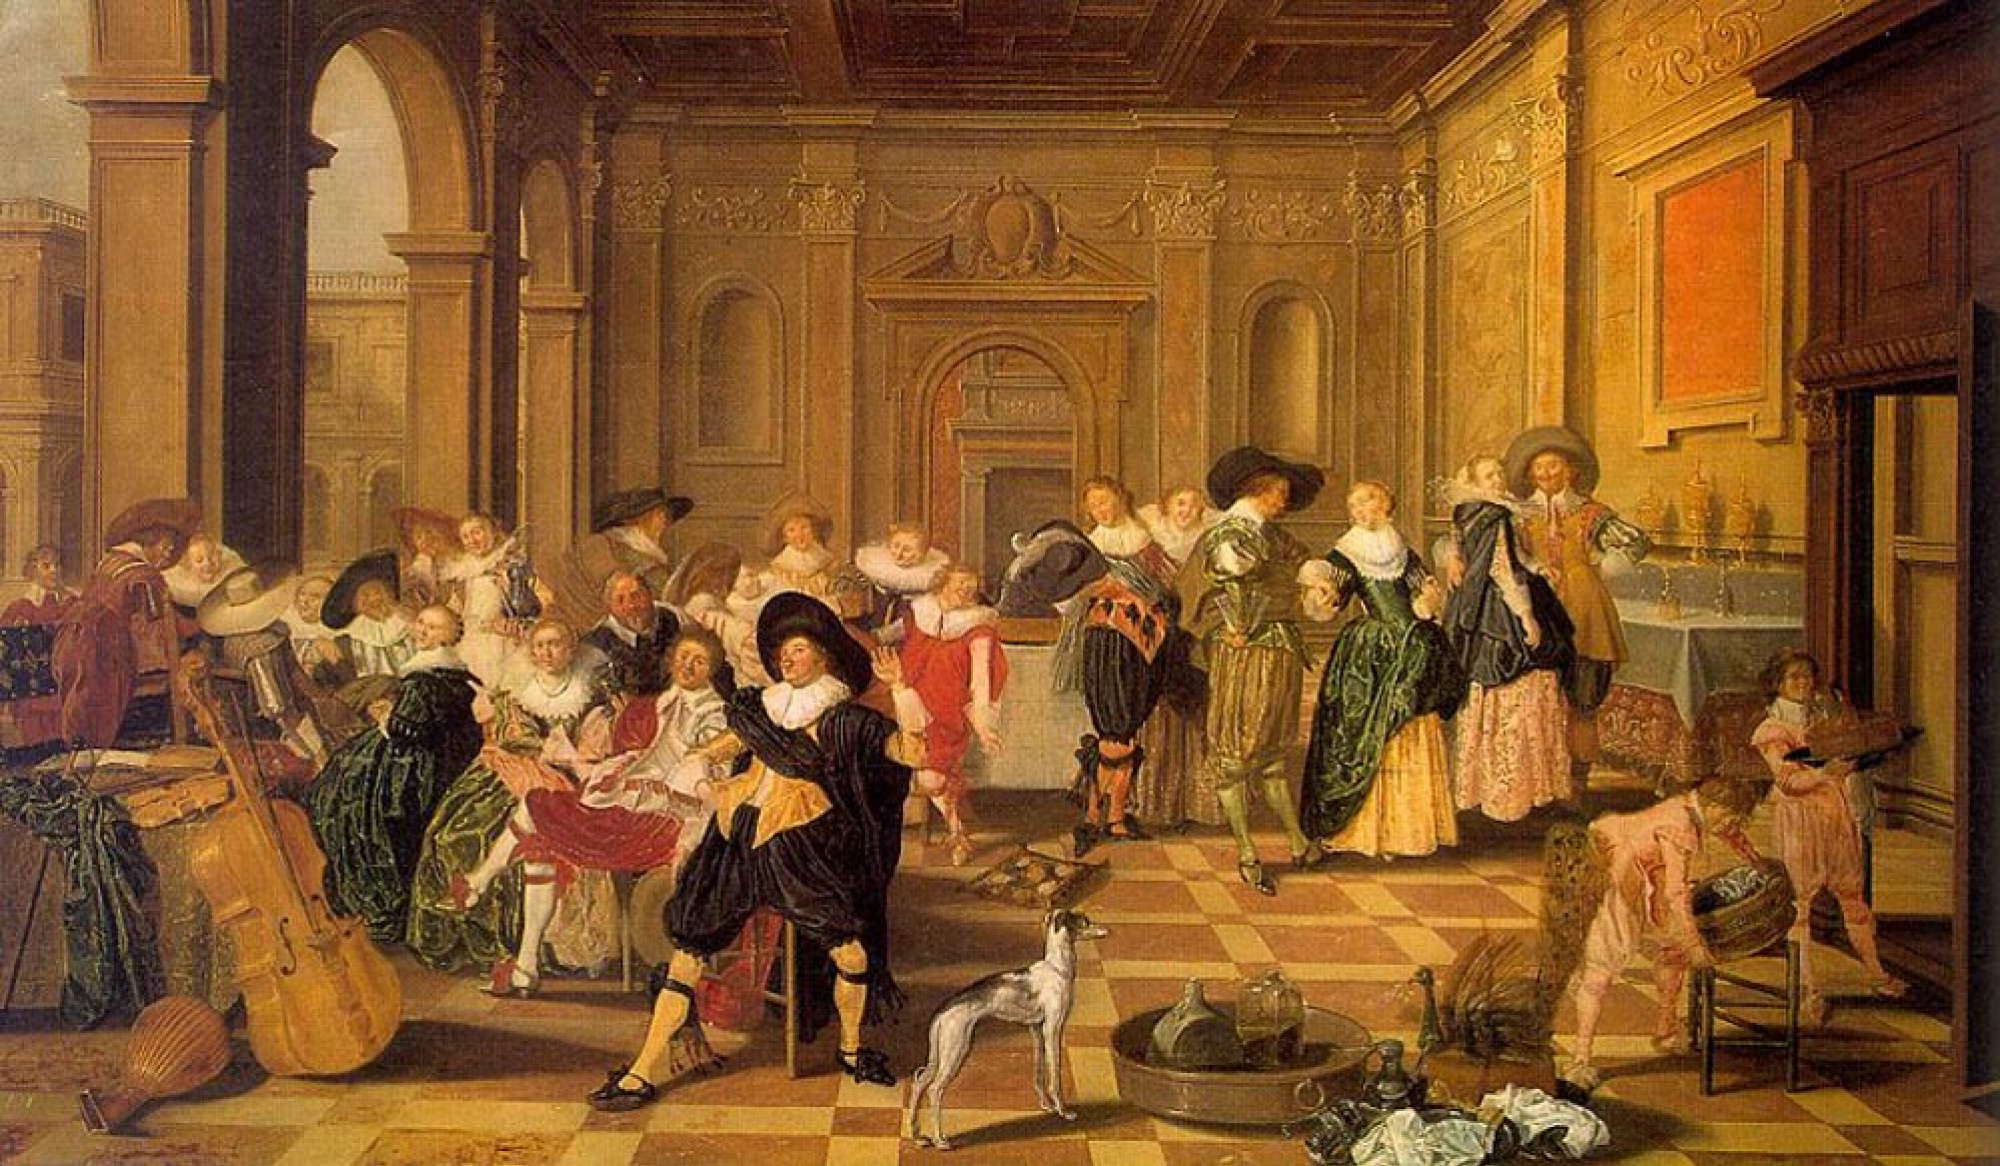 Banquet Scene In A Renaissance Hall By Dirk Huls History